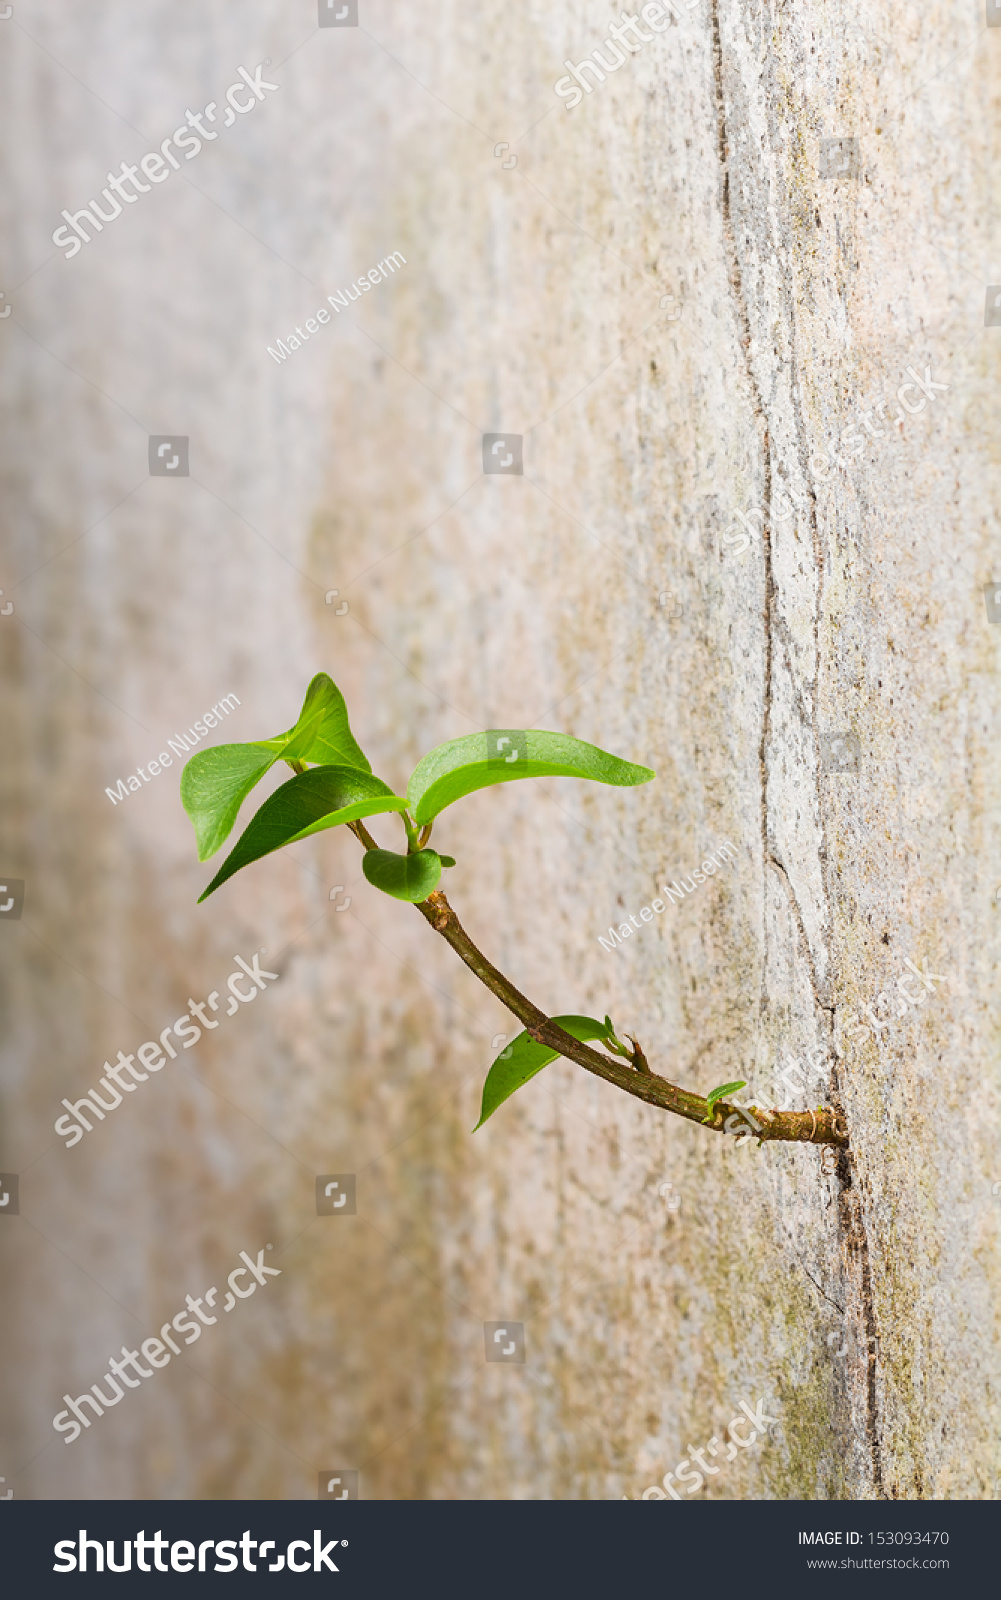 New plant germinates from the crack concrete wall, persistence of survival #153093470